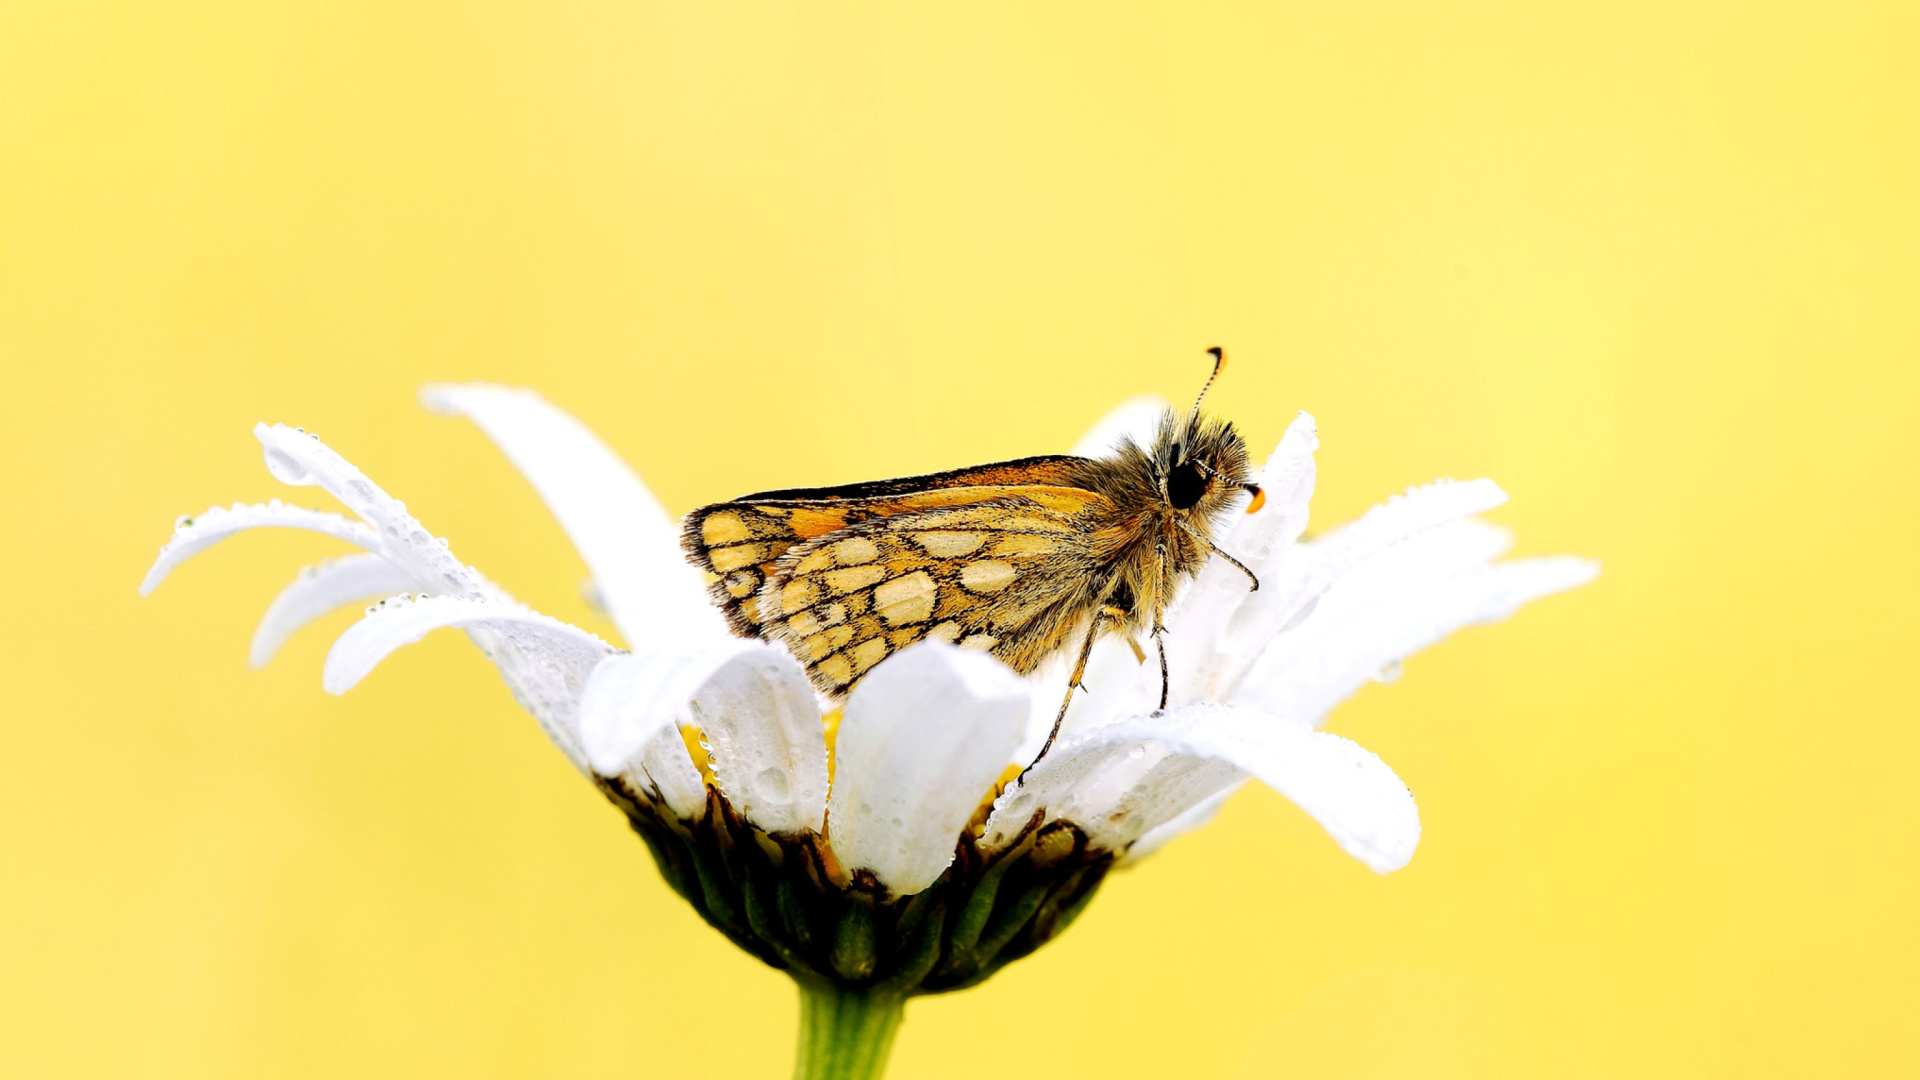 Butterfly and Daisy wallpaper 1920x1080